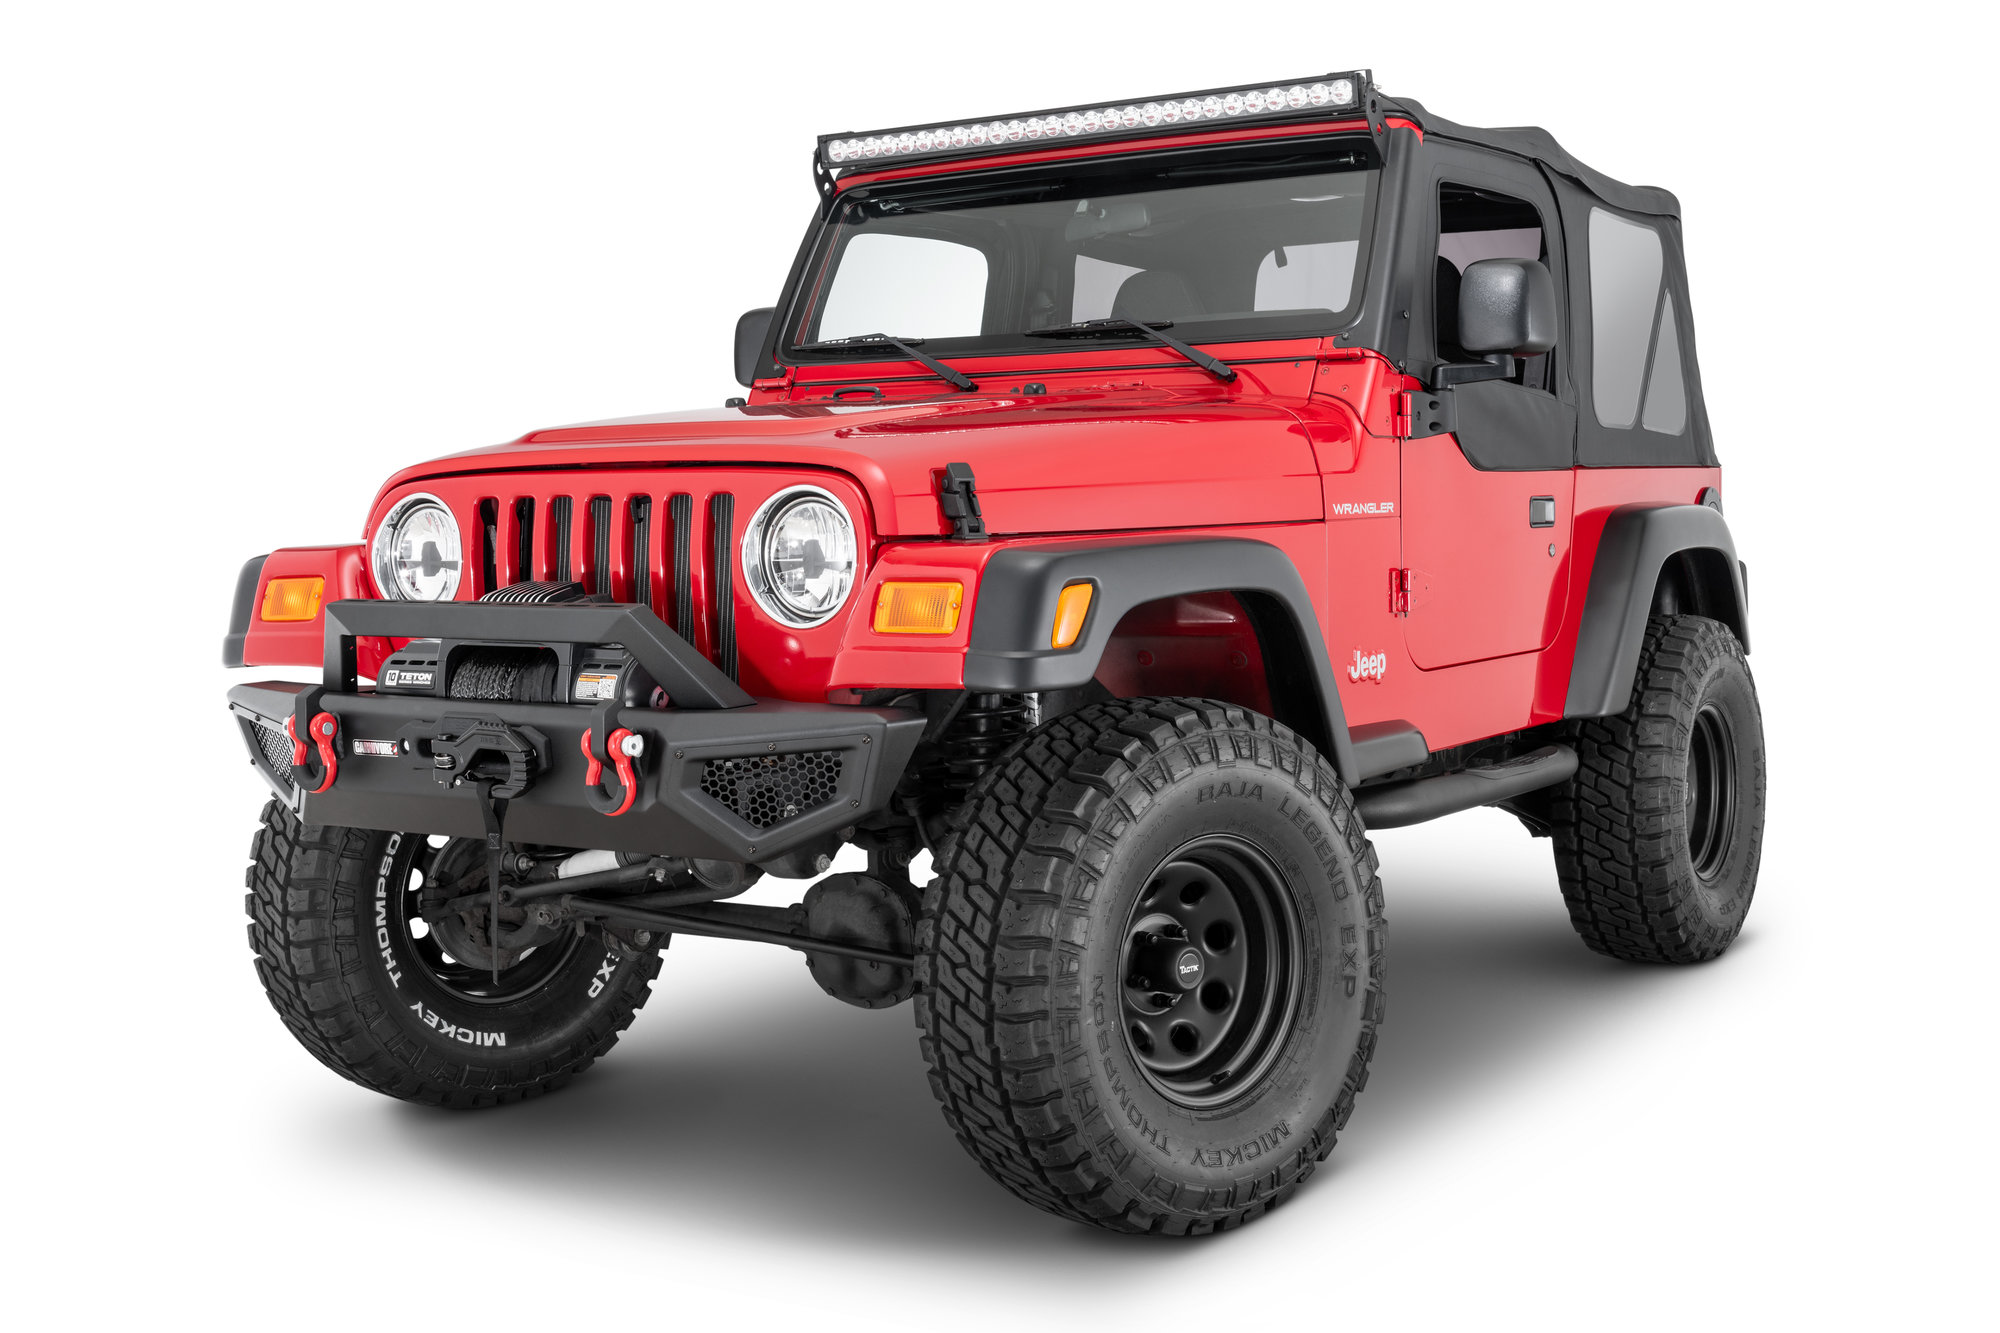 Quadratec Unveils Rugged Carnivore Bumpers For YJ and TJ